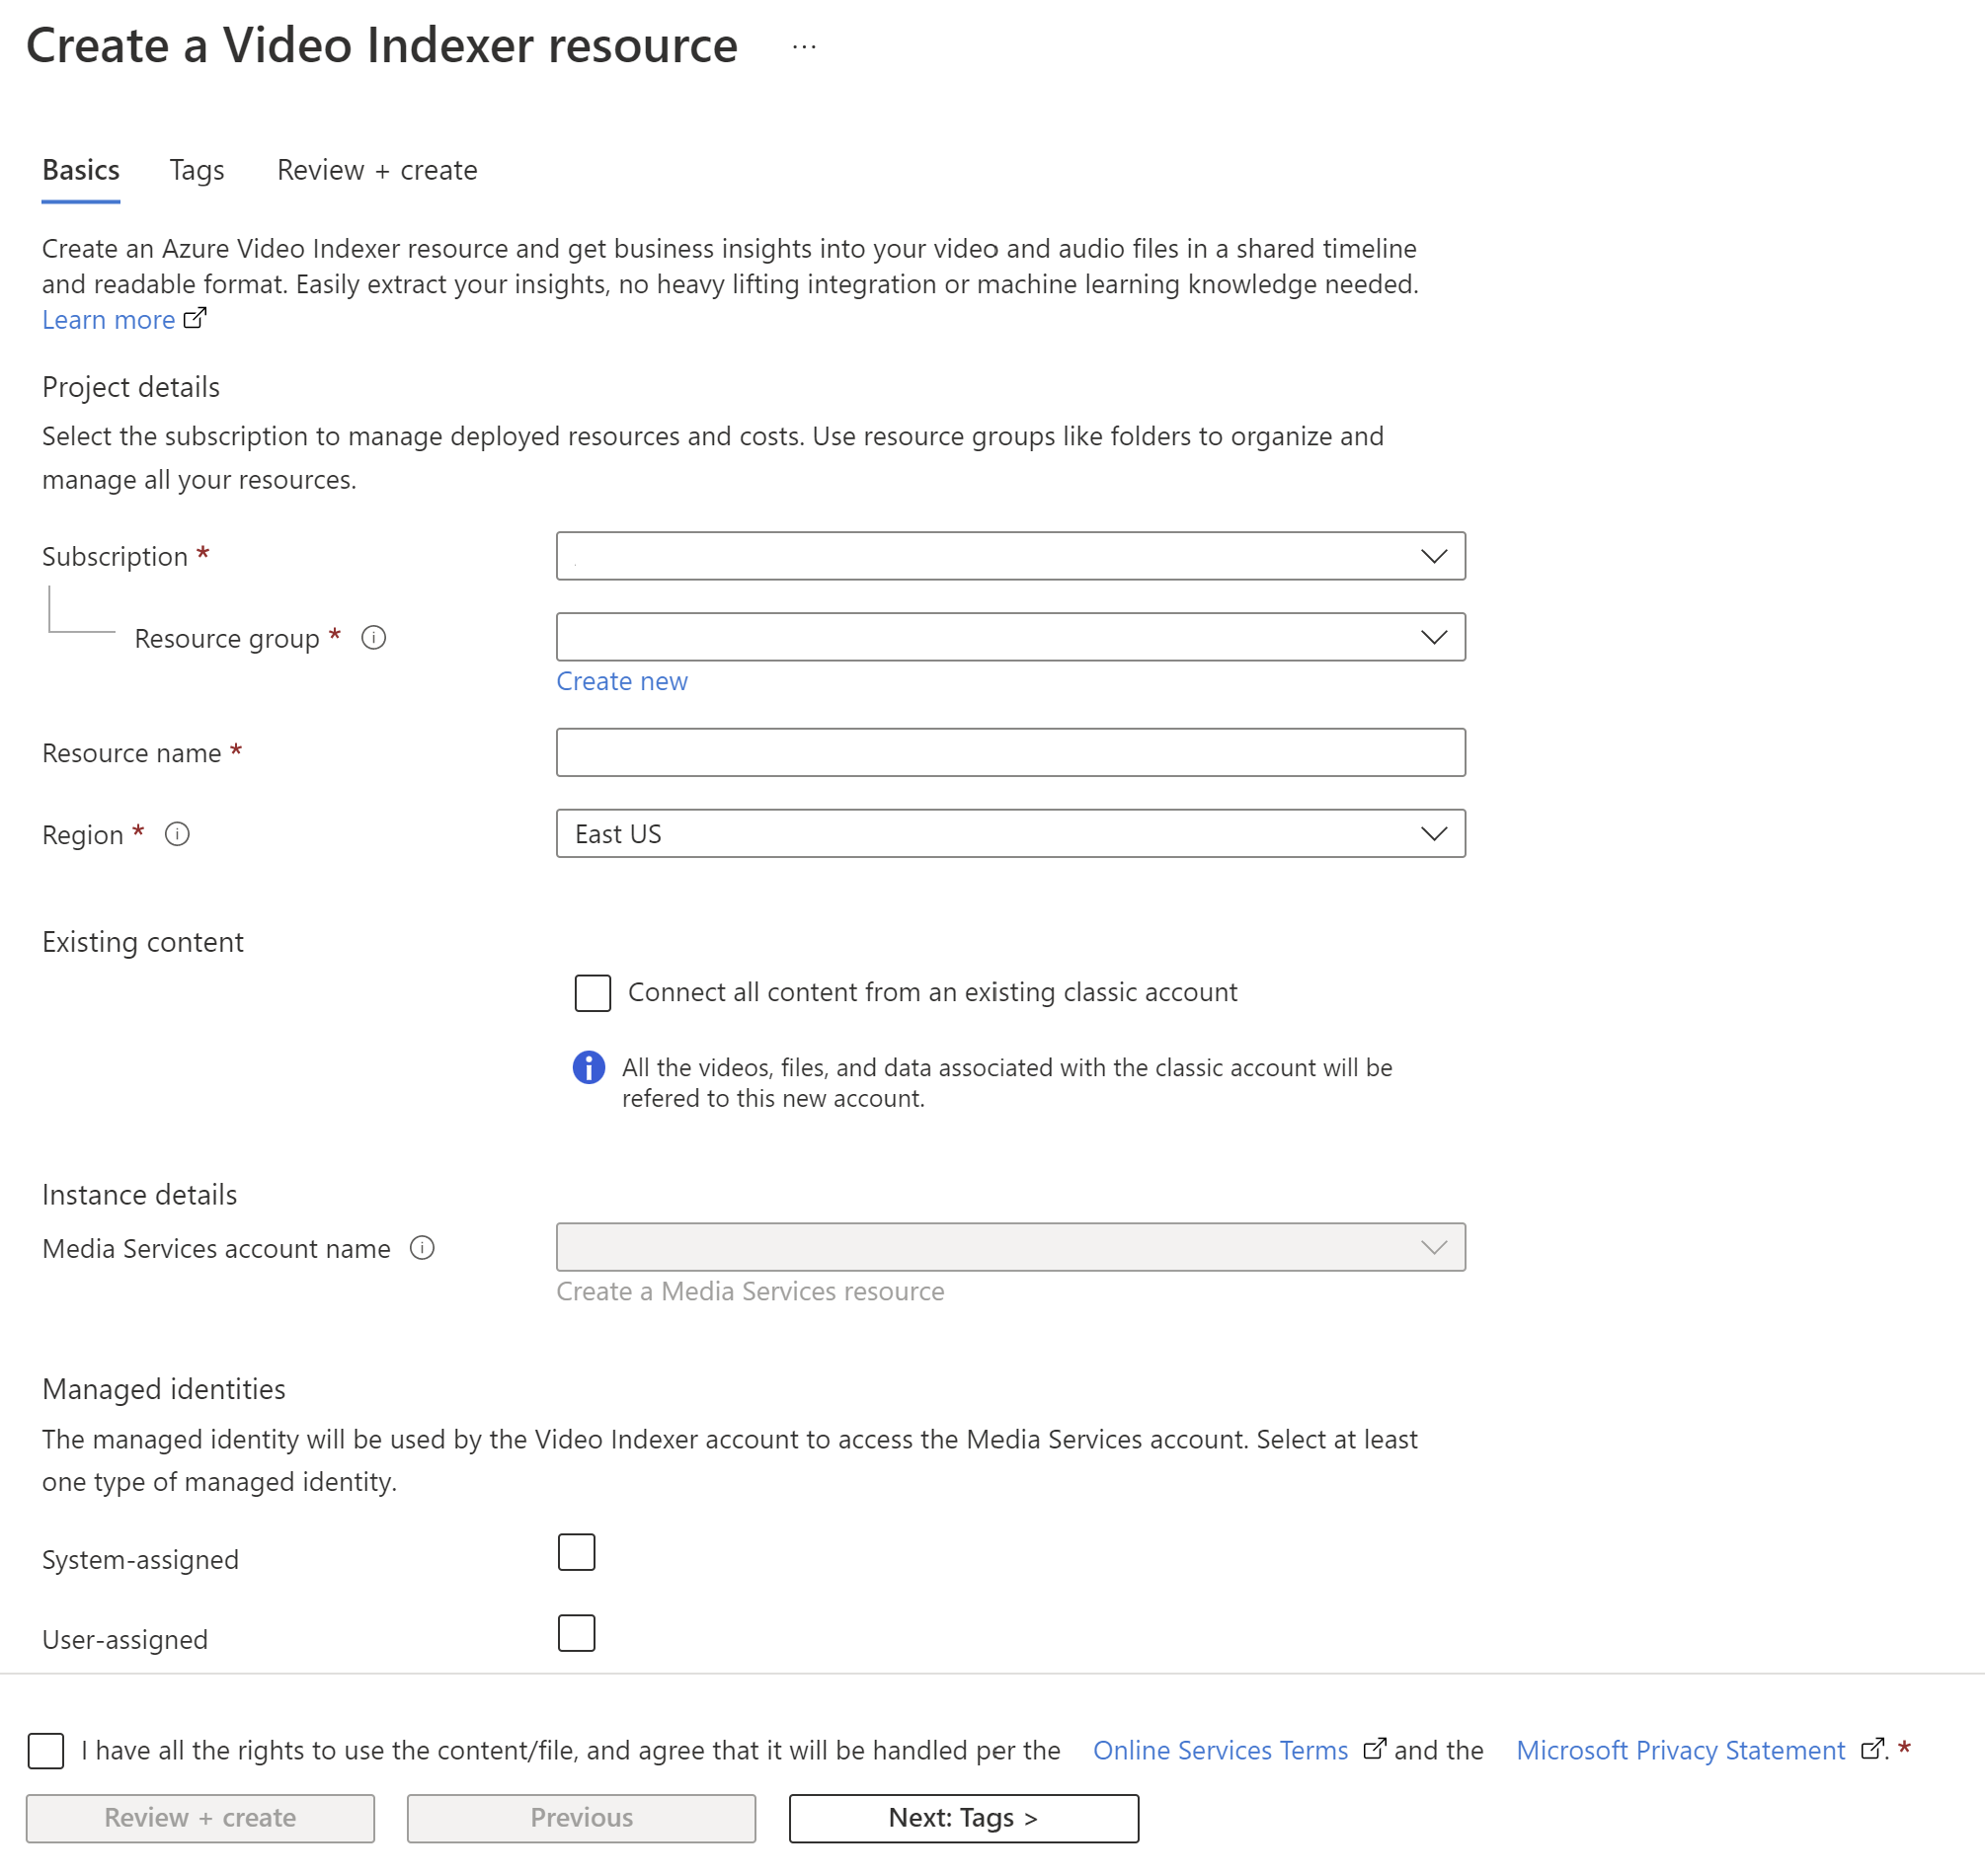 Screenshot showing how to create an Azure Video Indexer resource.